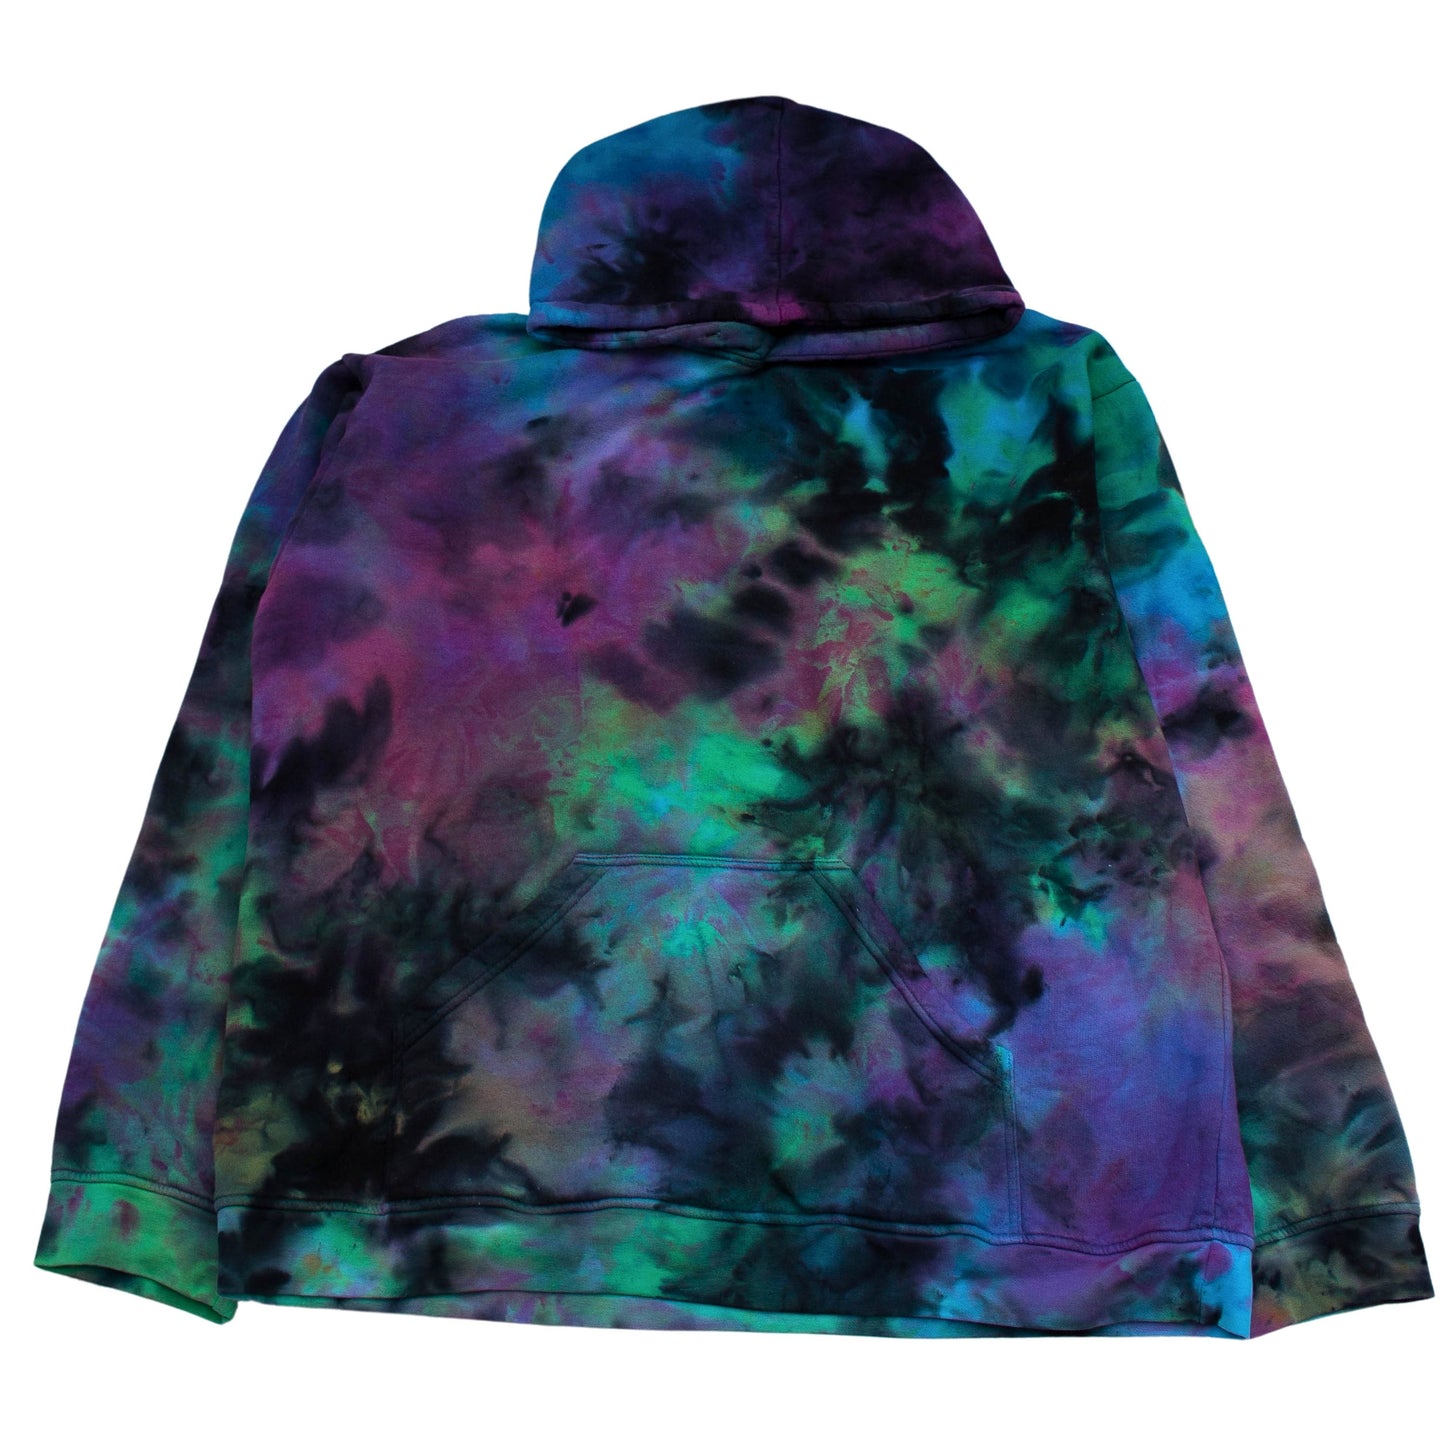 Size 3XL : Unique Tie-Dye Hoodie Stand Out with This One-of-a-Kind Vibrant Masterpiece